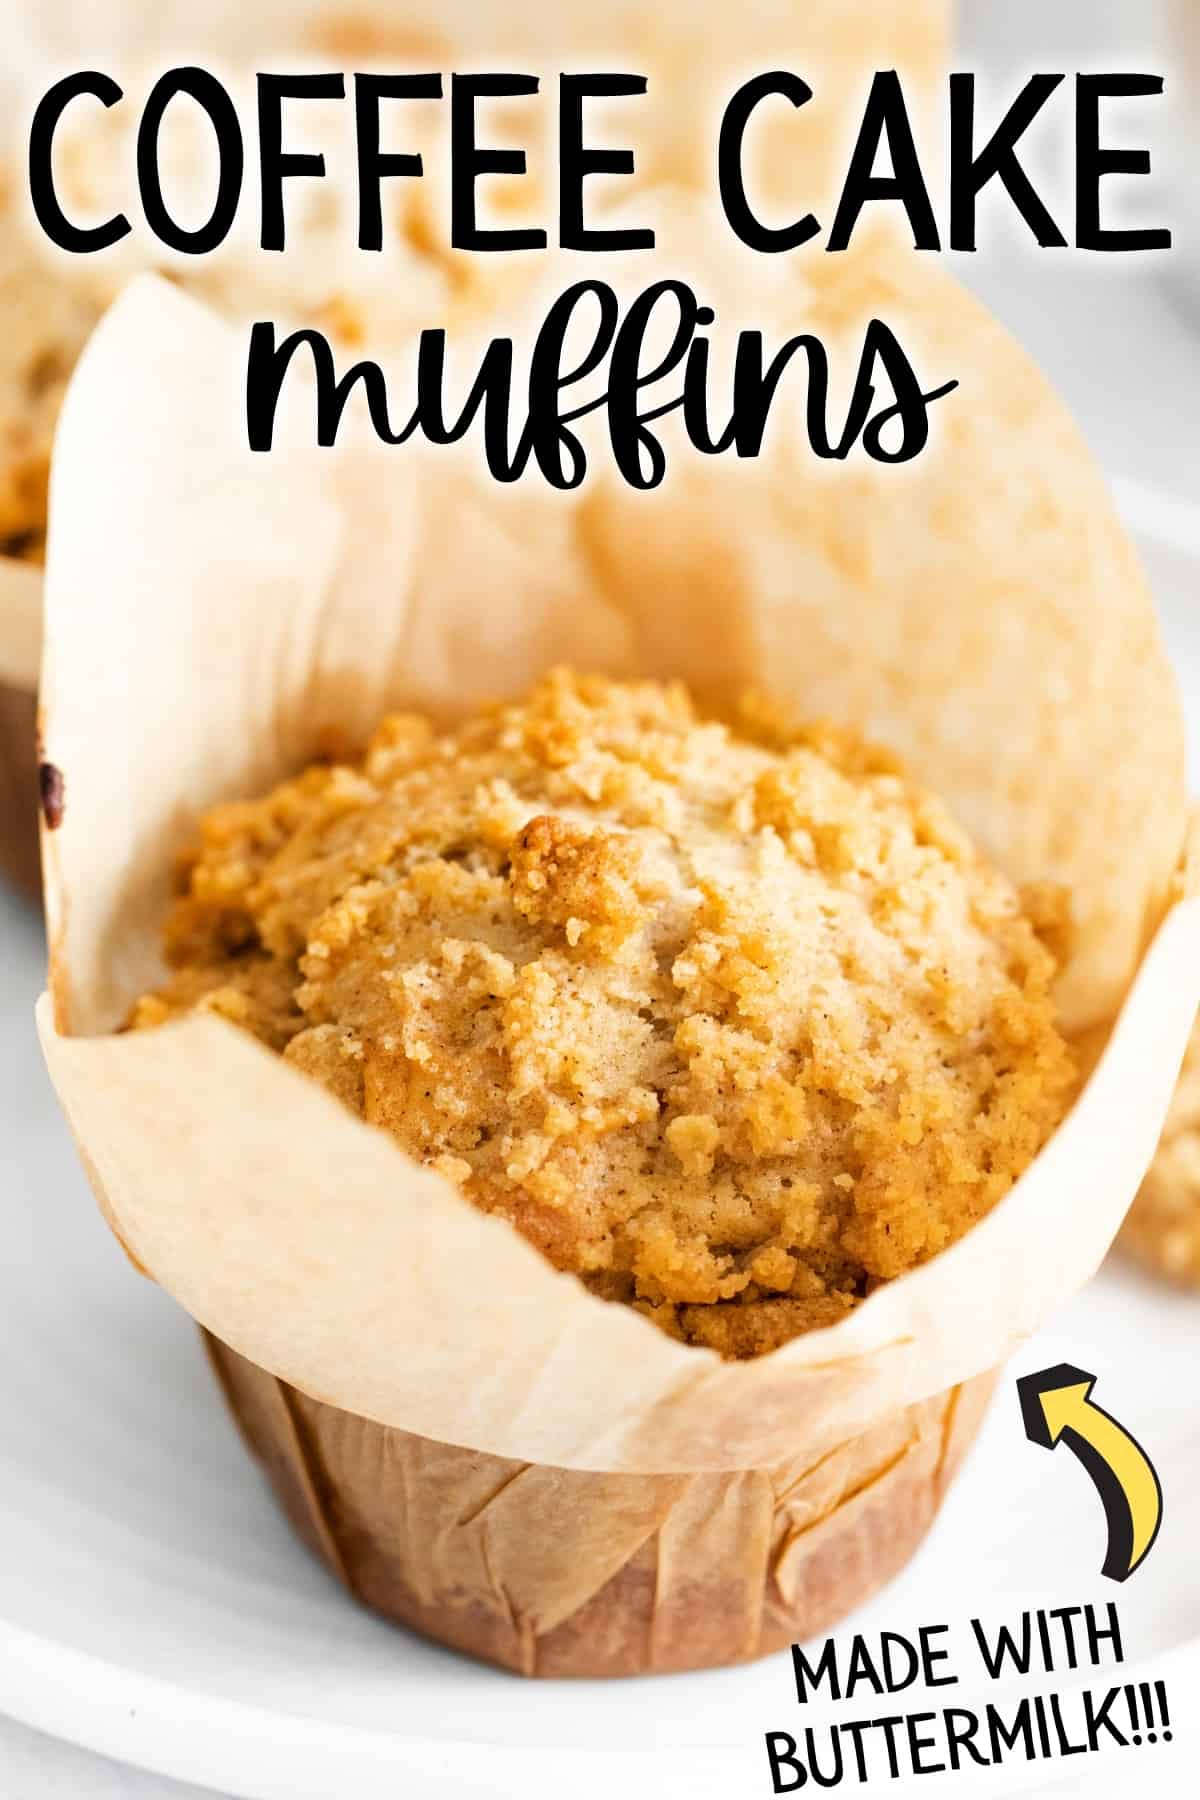 Reads: Coffee Cake Muffins made with Buttermilk; image shows crumb-topped muffin in paper wrapper